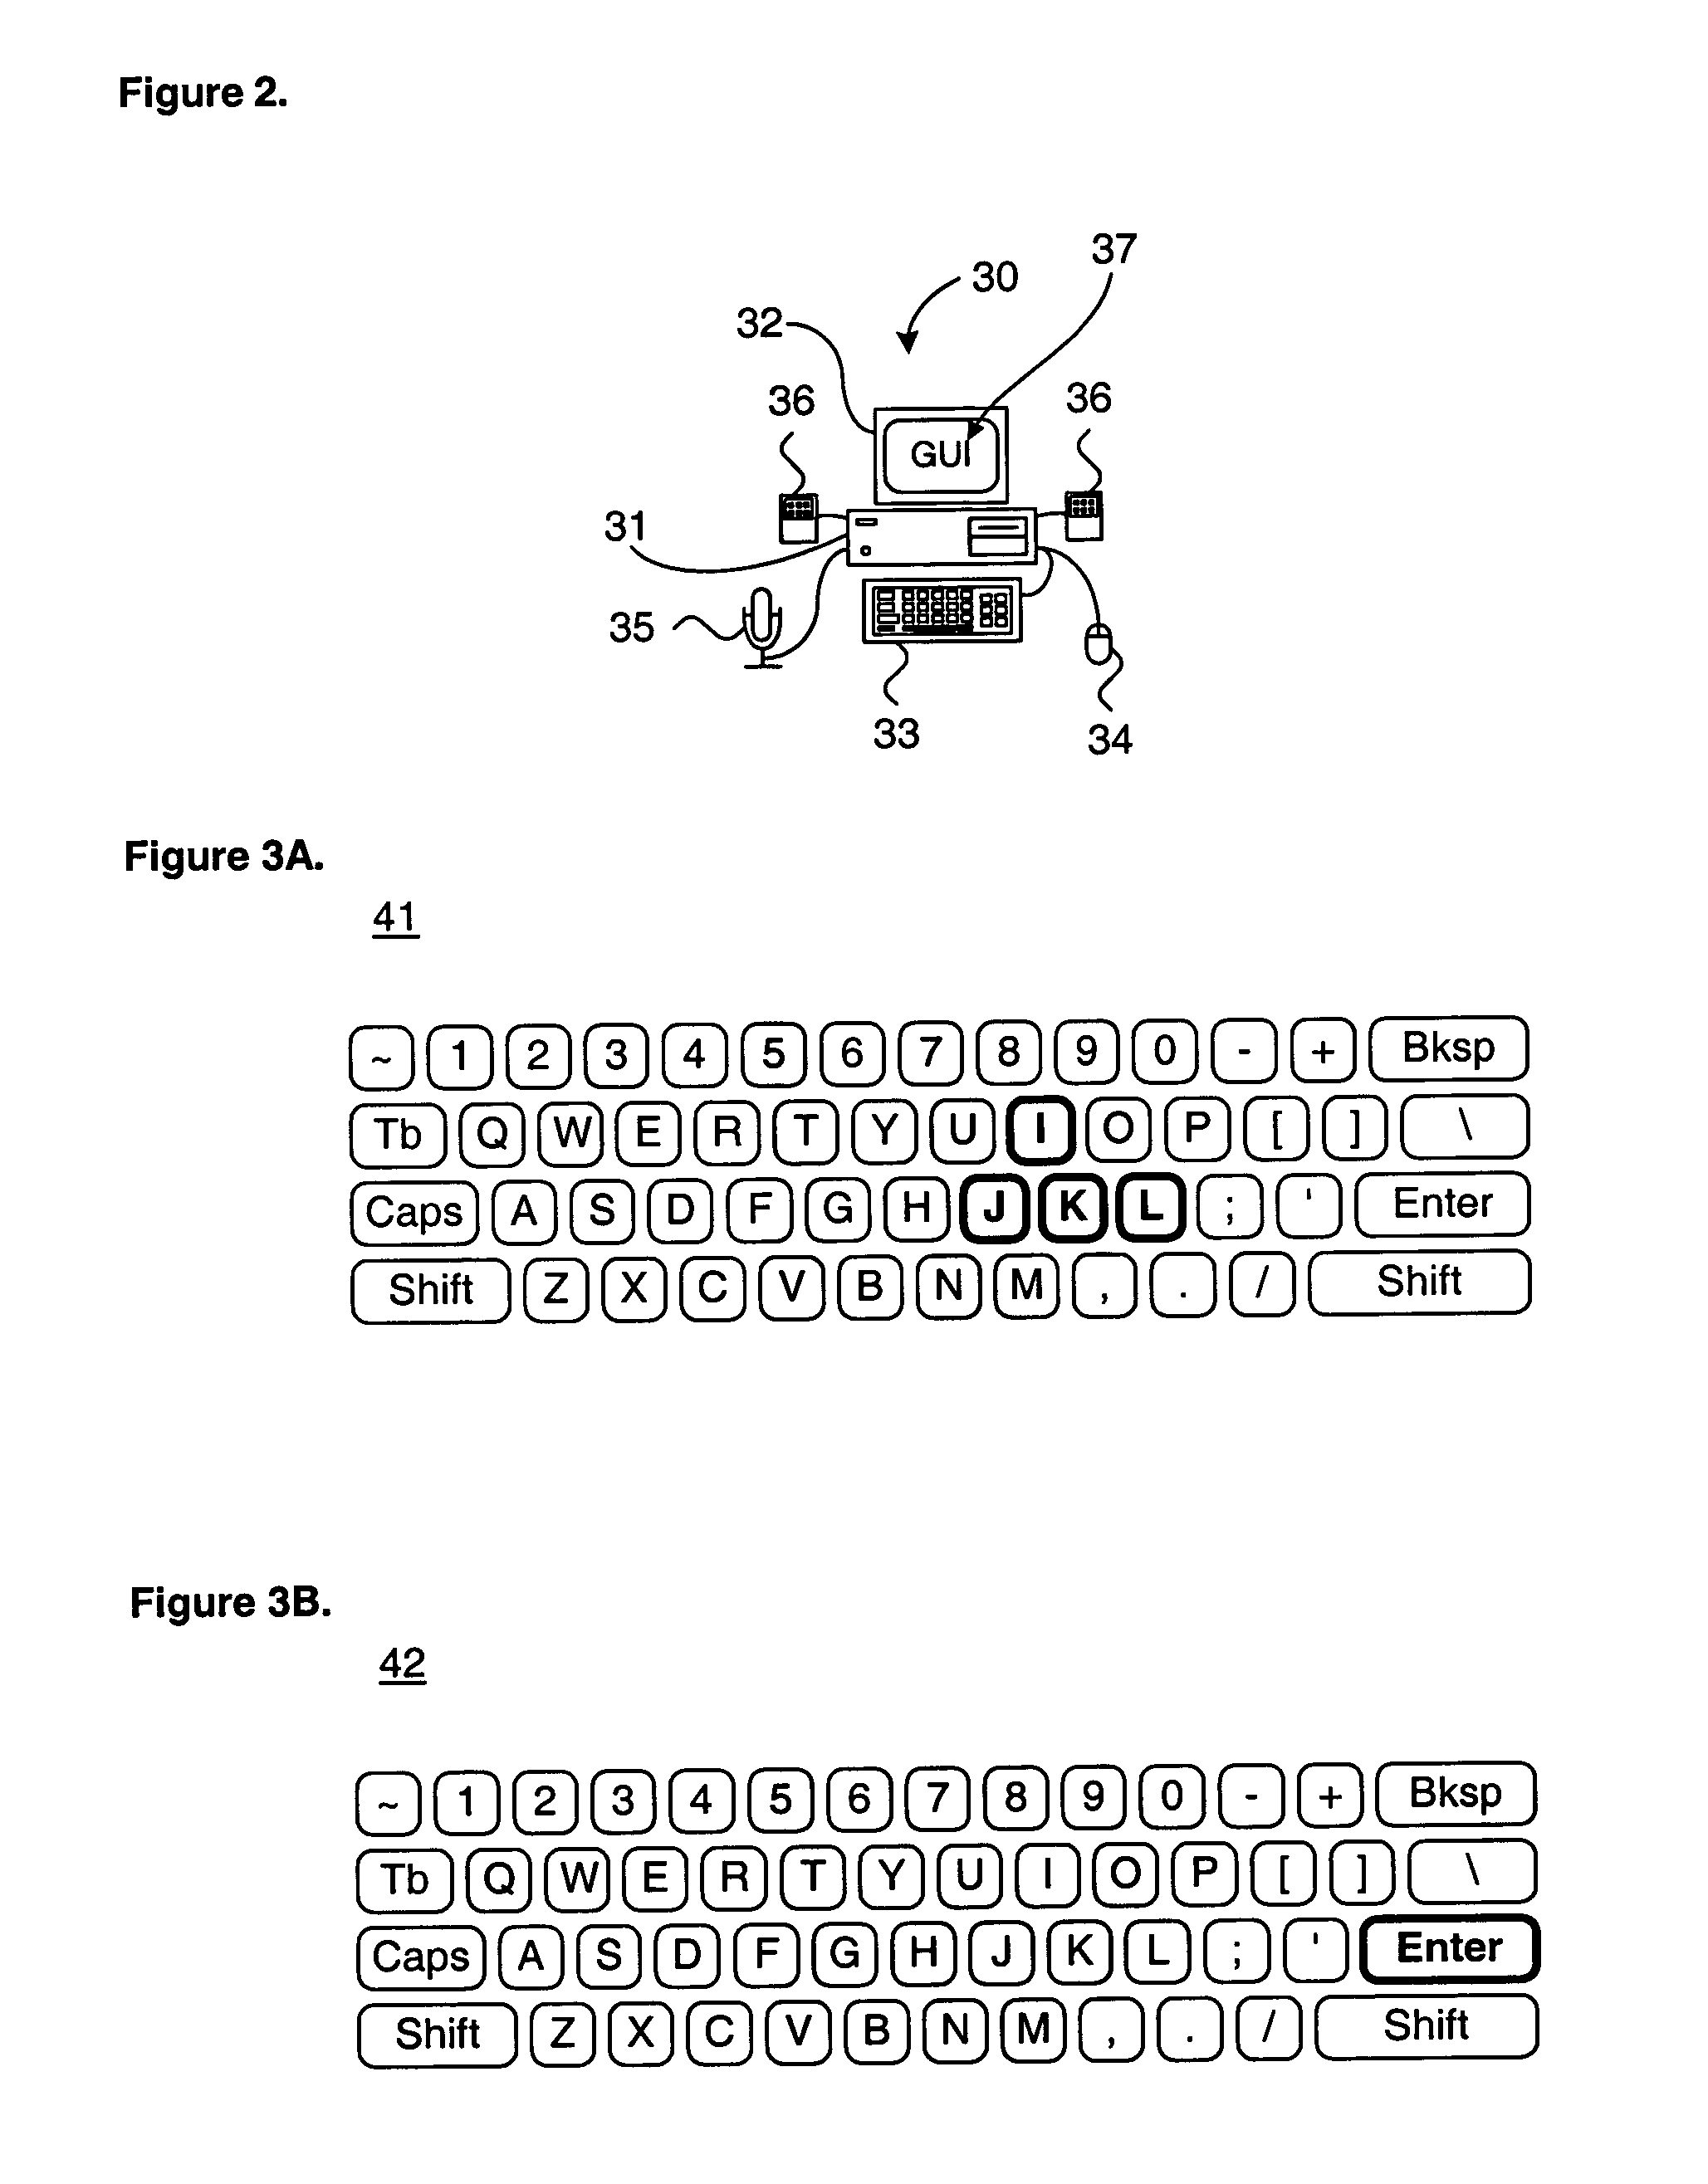 System and method for navigating within a graphical user interface without using a pointing device